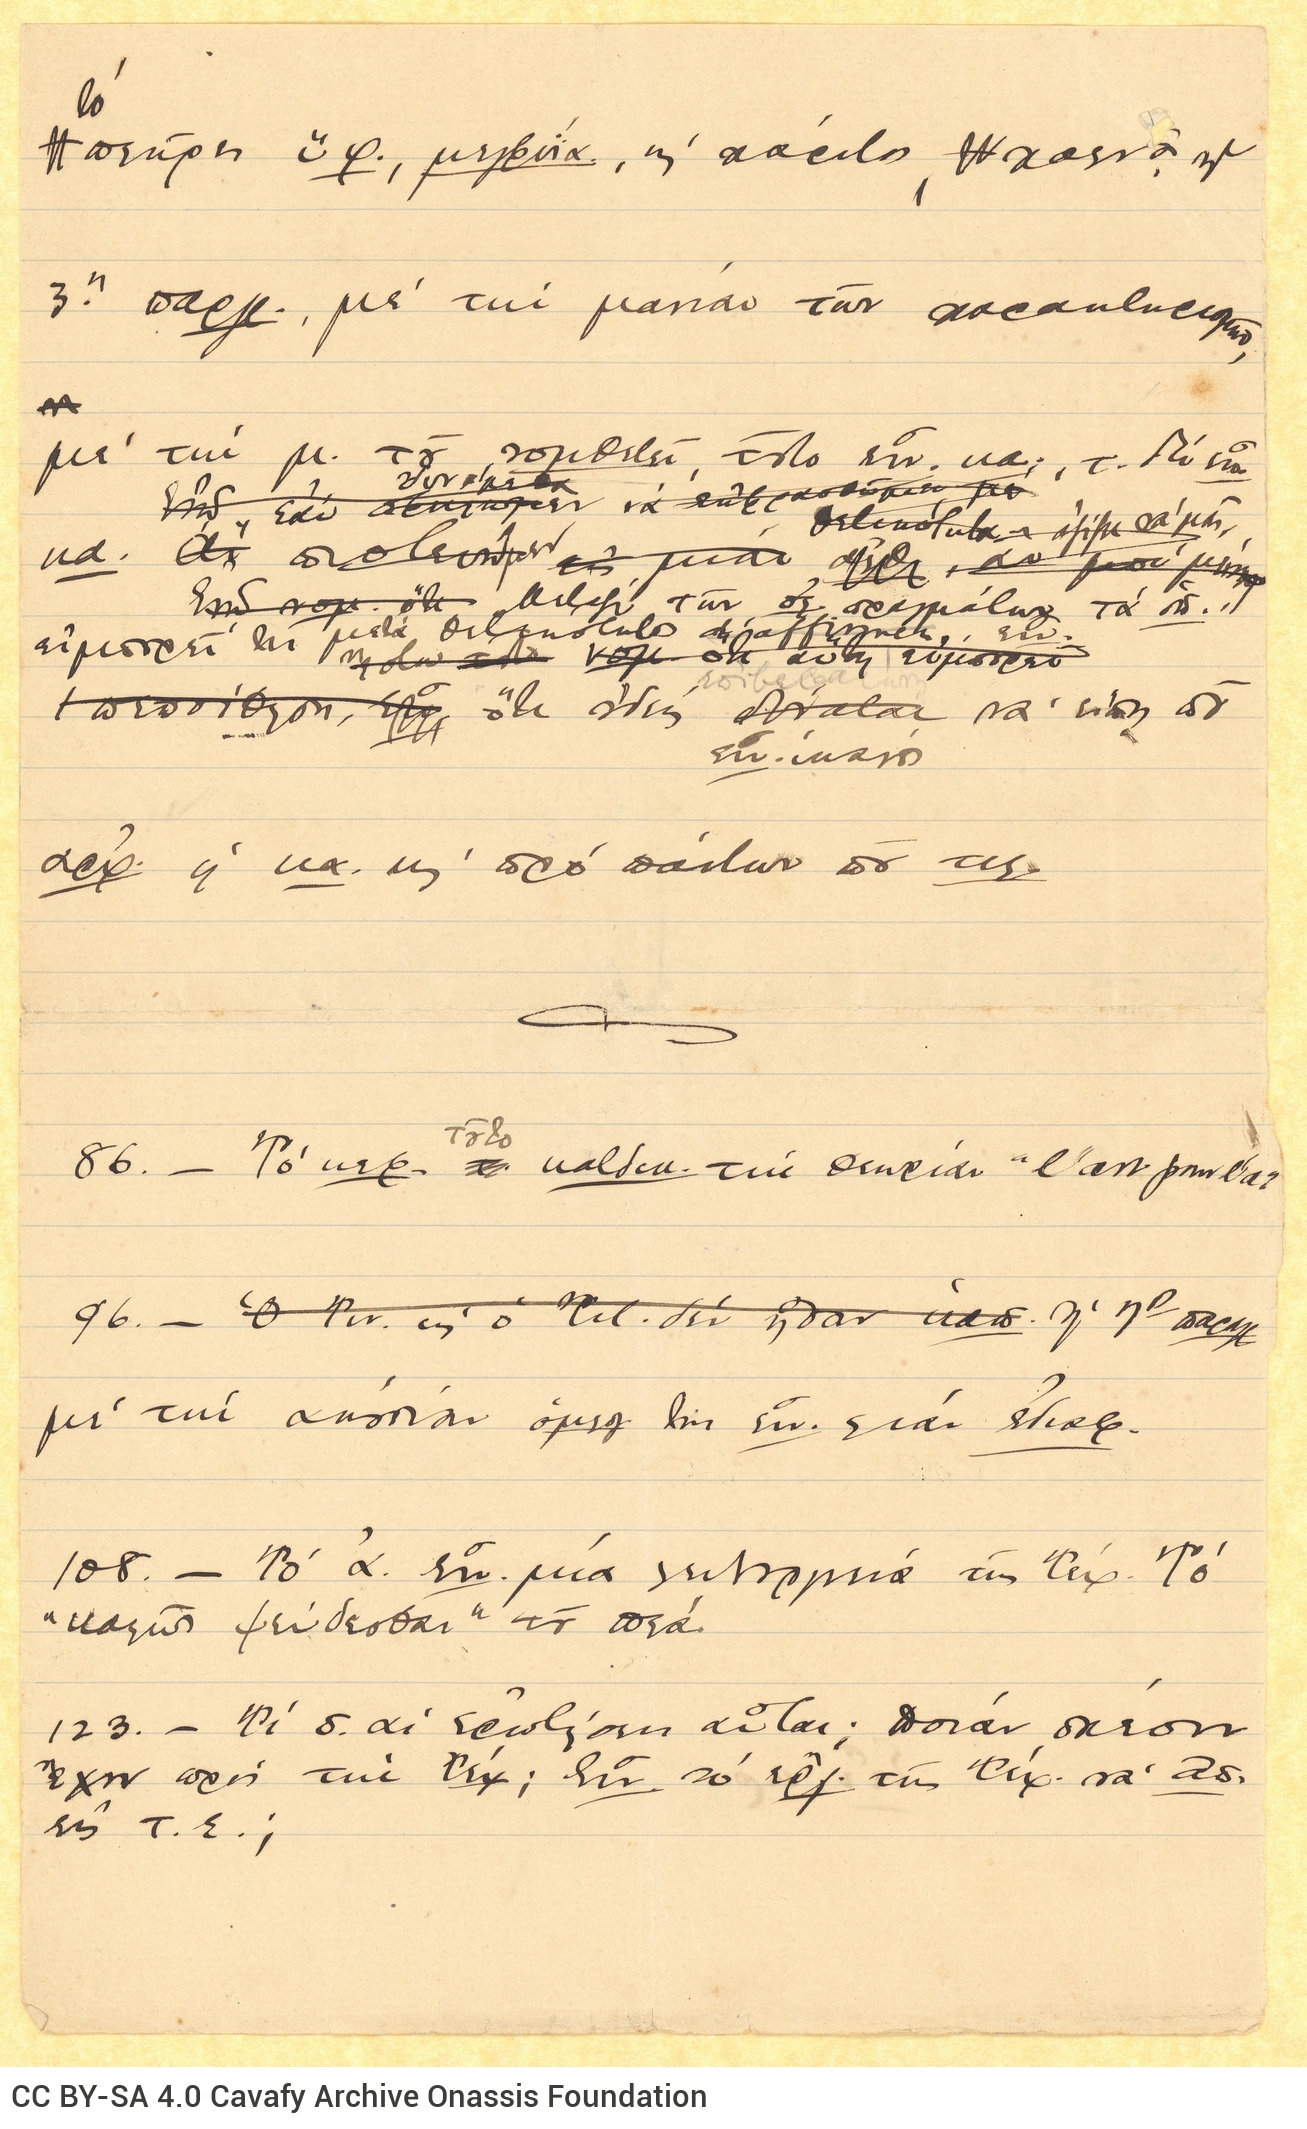 Handwritten notes on seven ruled sheets with cancellations, emendations and abbreviations. One of the pages is numbered "5